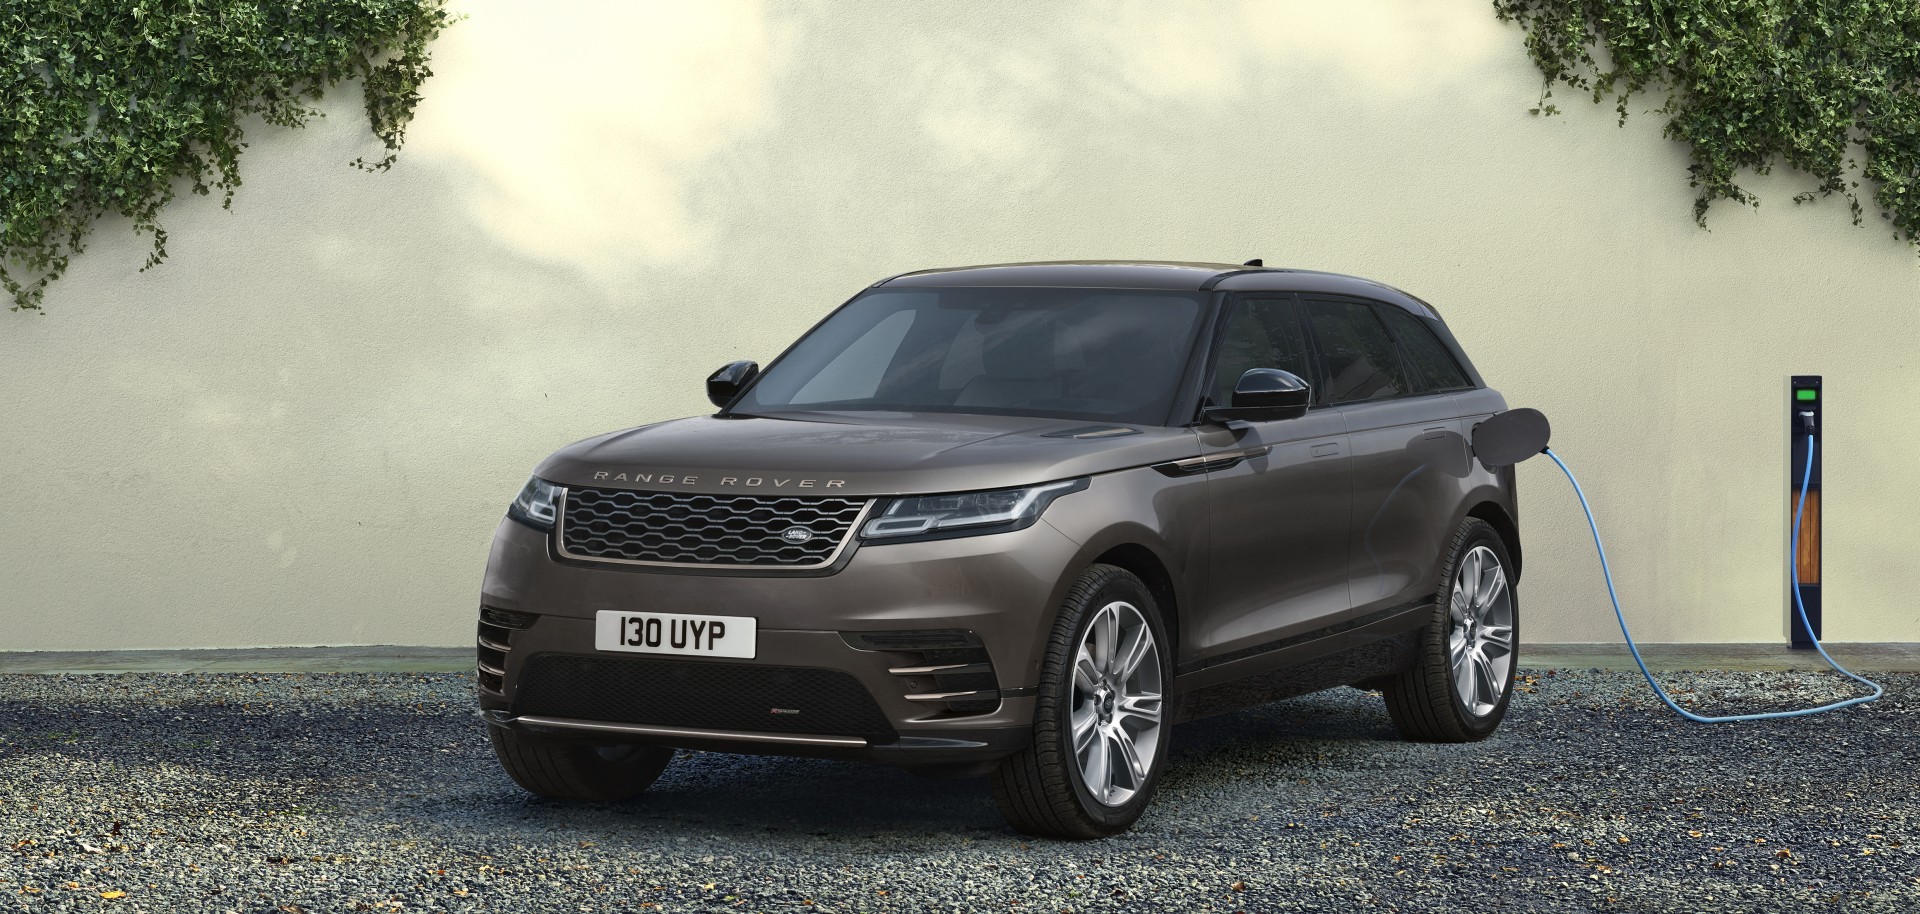 2022 Range Rover Velar Gets Updates, a Special Edition, and More